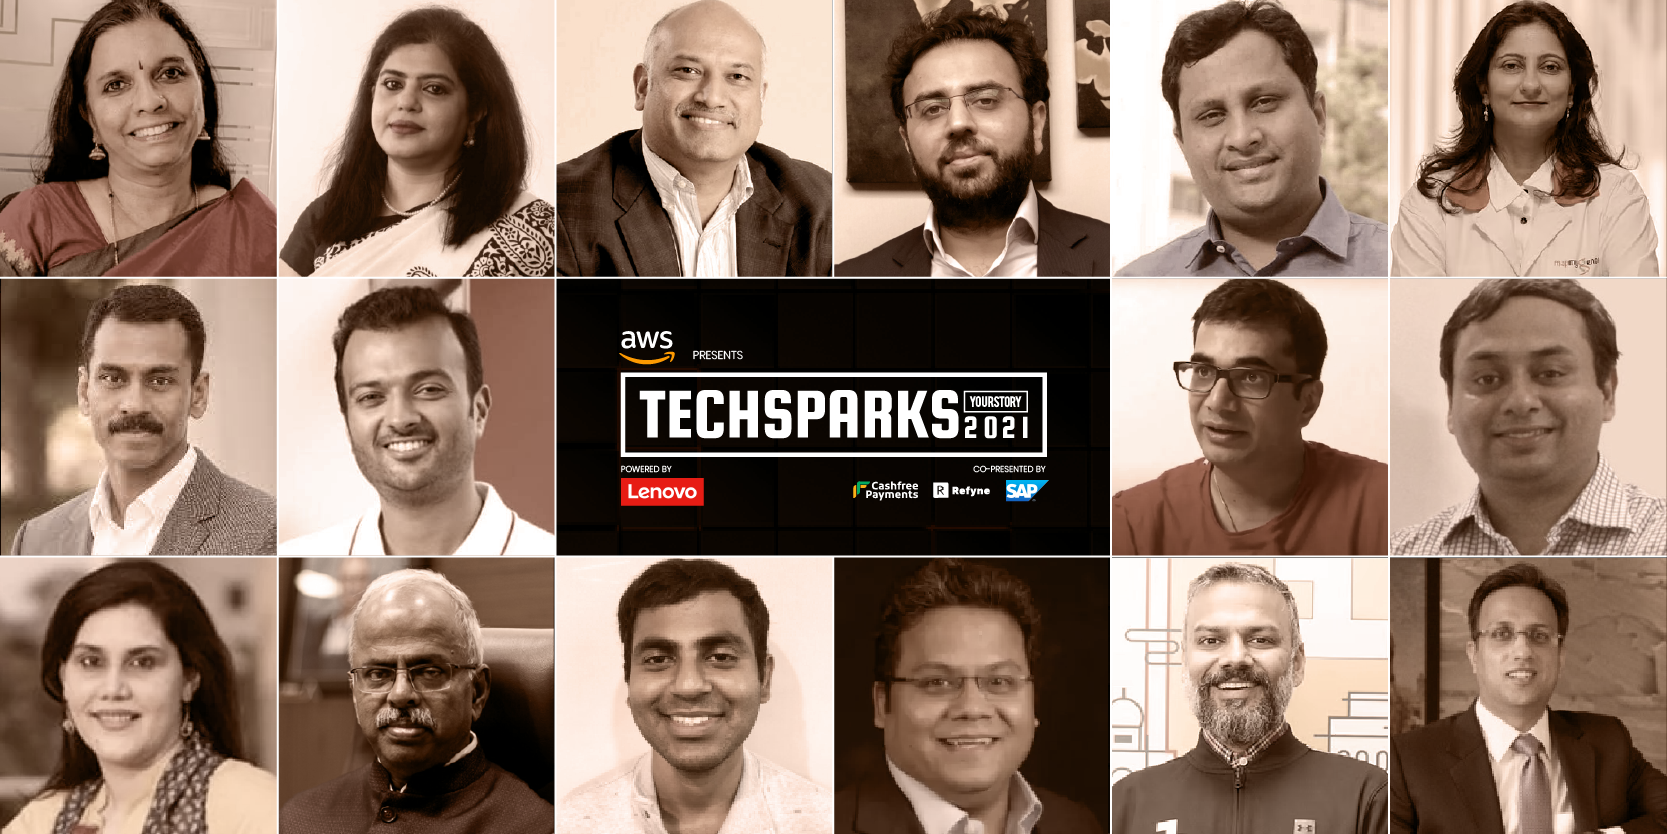 From alternative medicine to an alternative world: Here’s what is lined up on Day 5 of TechSparks 2021